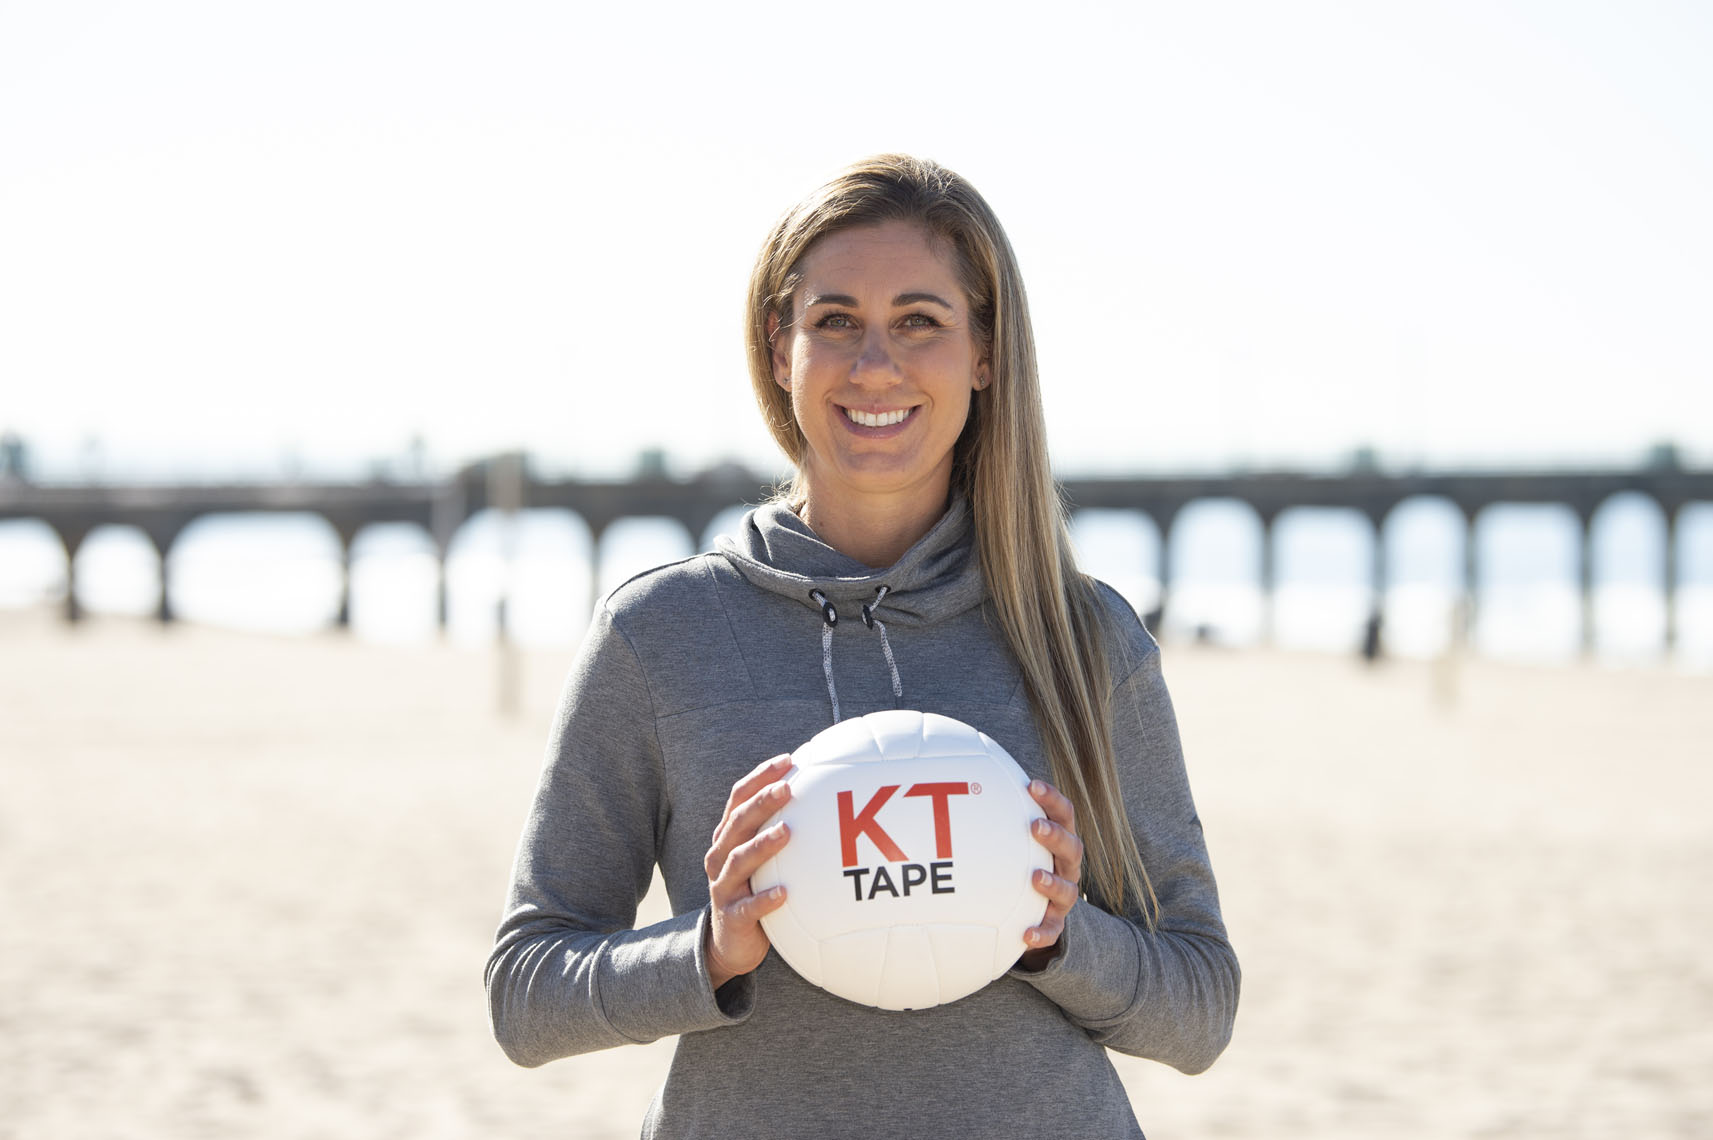 Beach Volleyball players April Ross and Alix Klineman for KT Tape